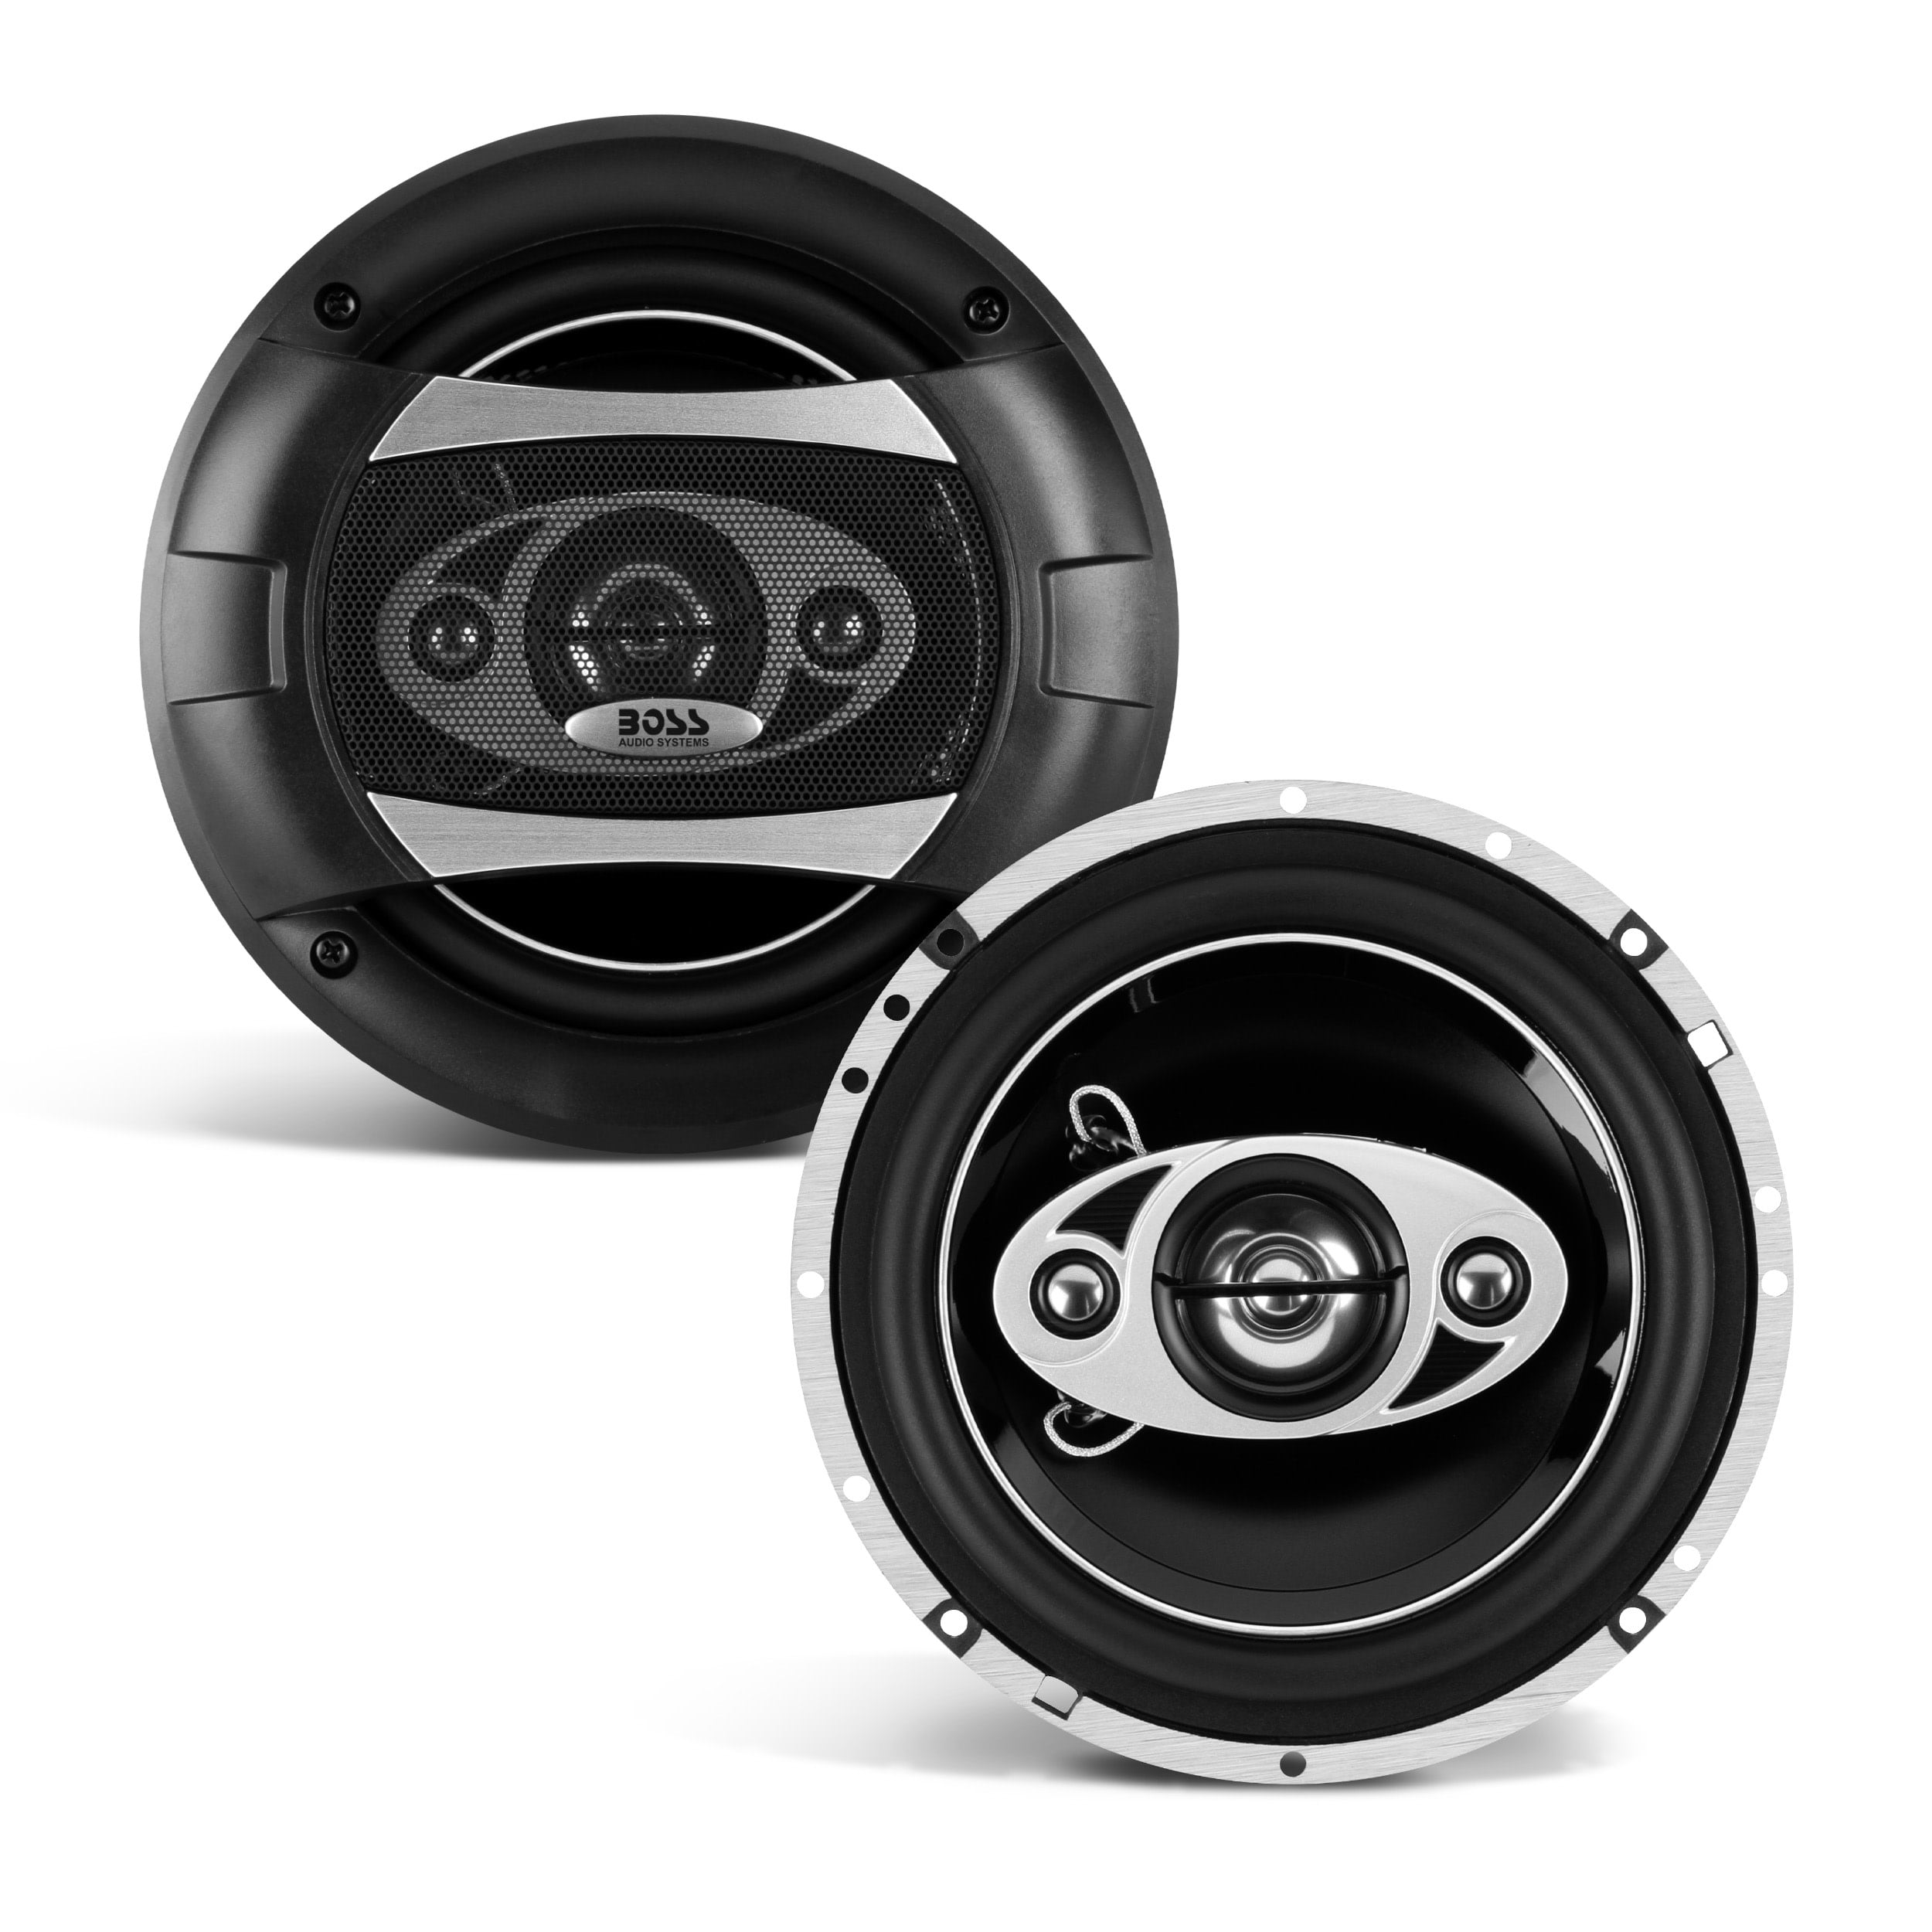 Full Range Audio BOSS Audio Systems CH6530B Chaos Series 6.5 Inch Car Stereo Door Speakers Coaxial Sold in Pairs Tweeters 3 Way 300 Watts Max 